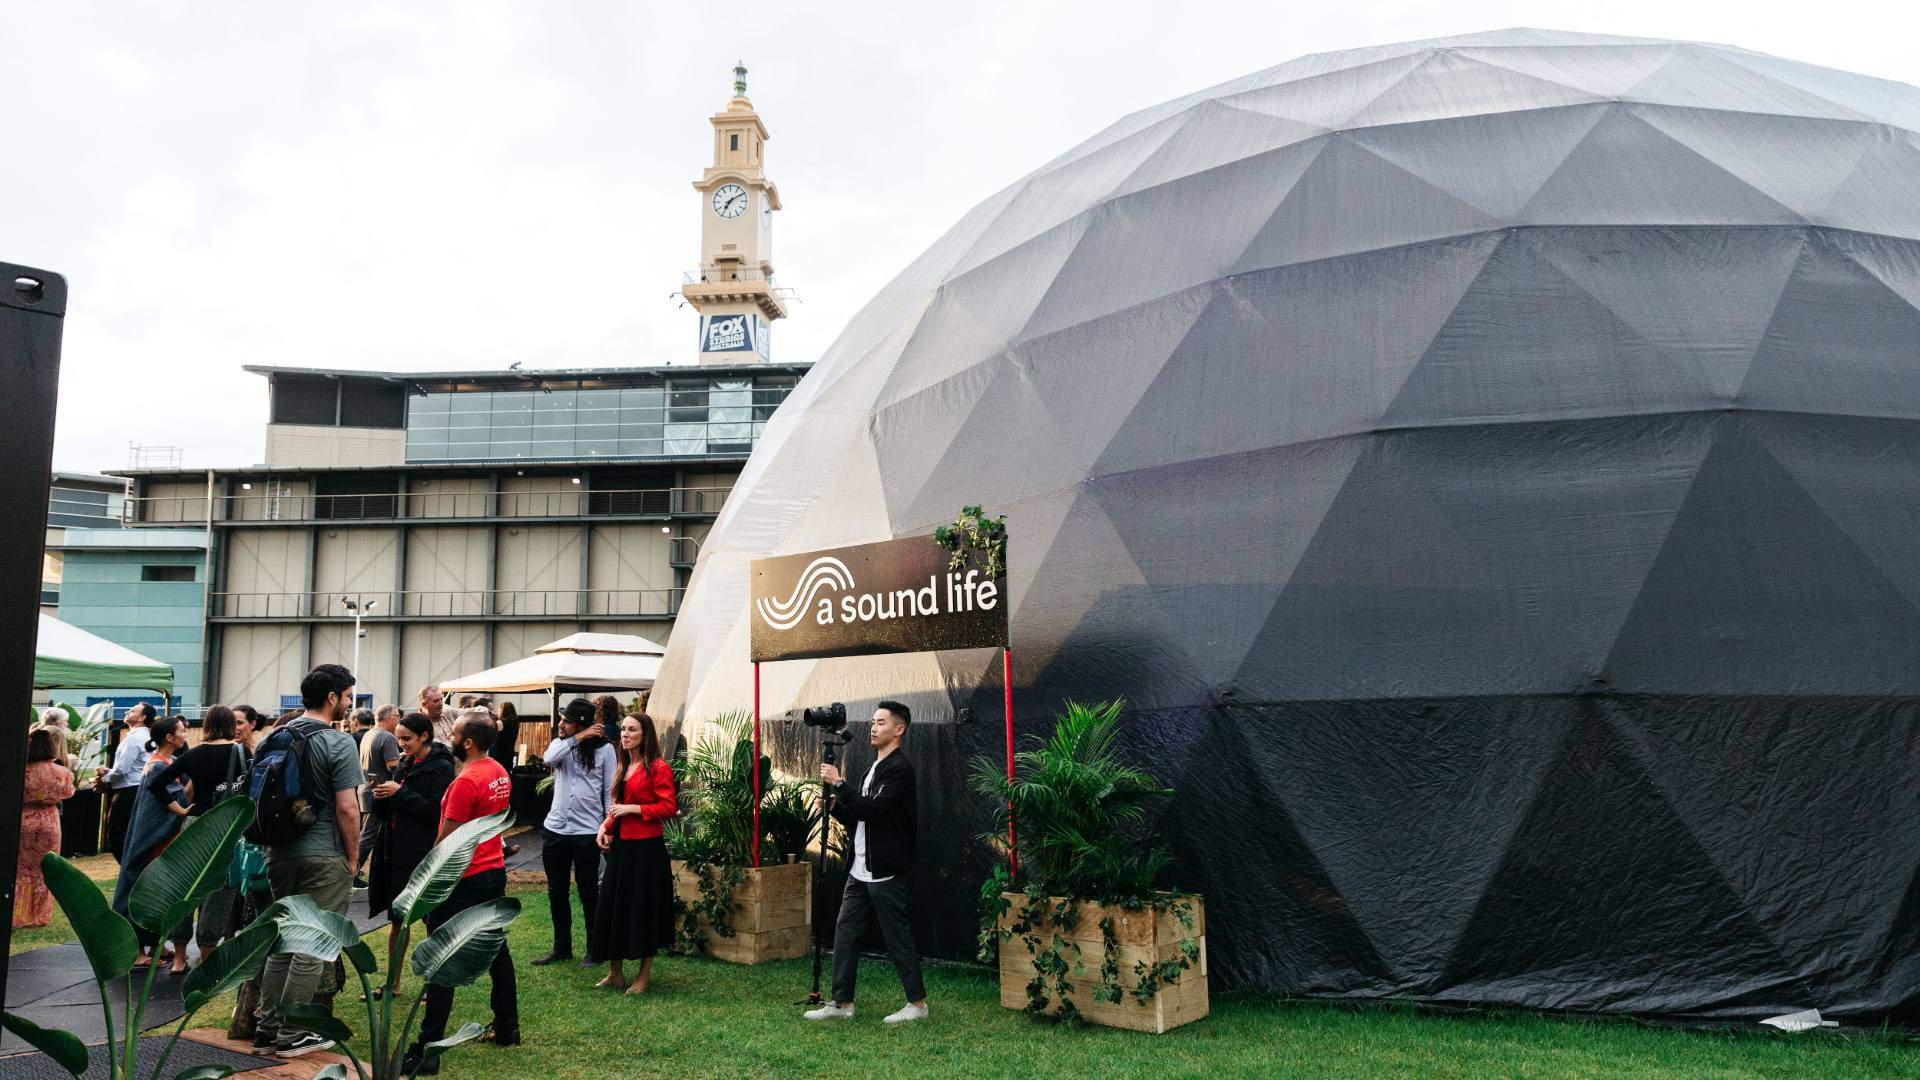 A New Dome of Yoga, Meditation and Music Has Popped Up in the Entertainment Quarter